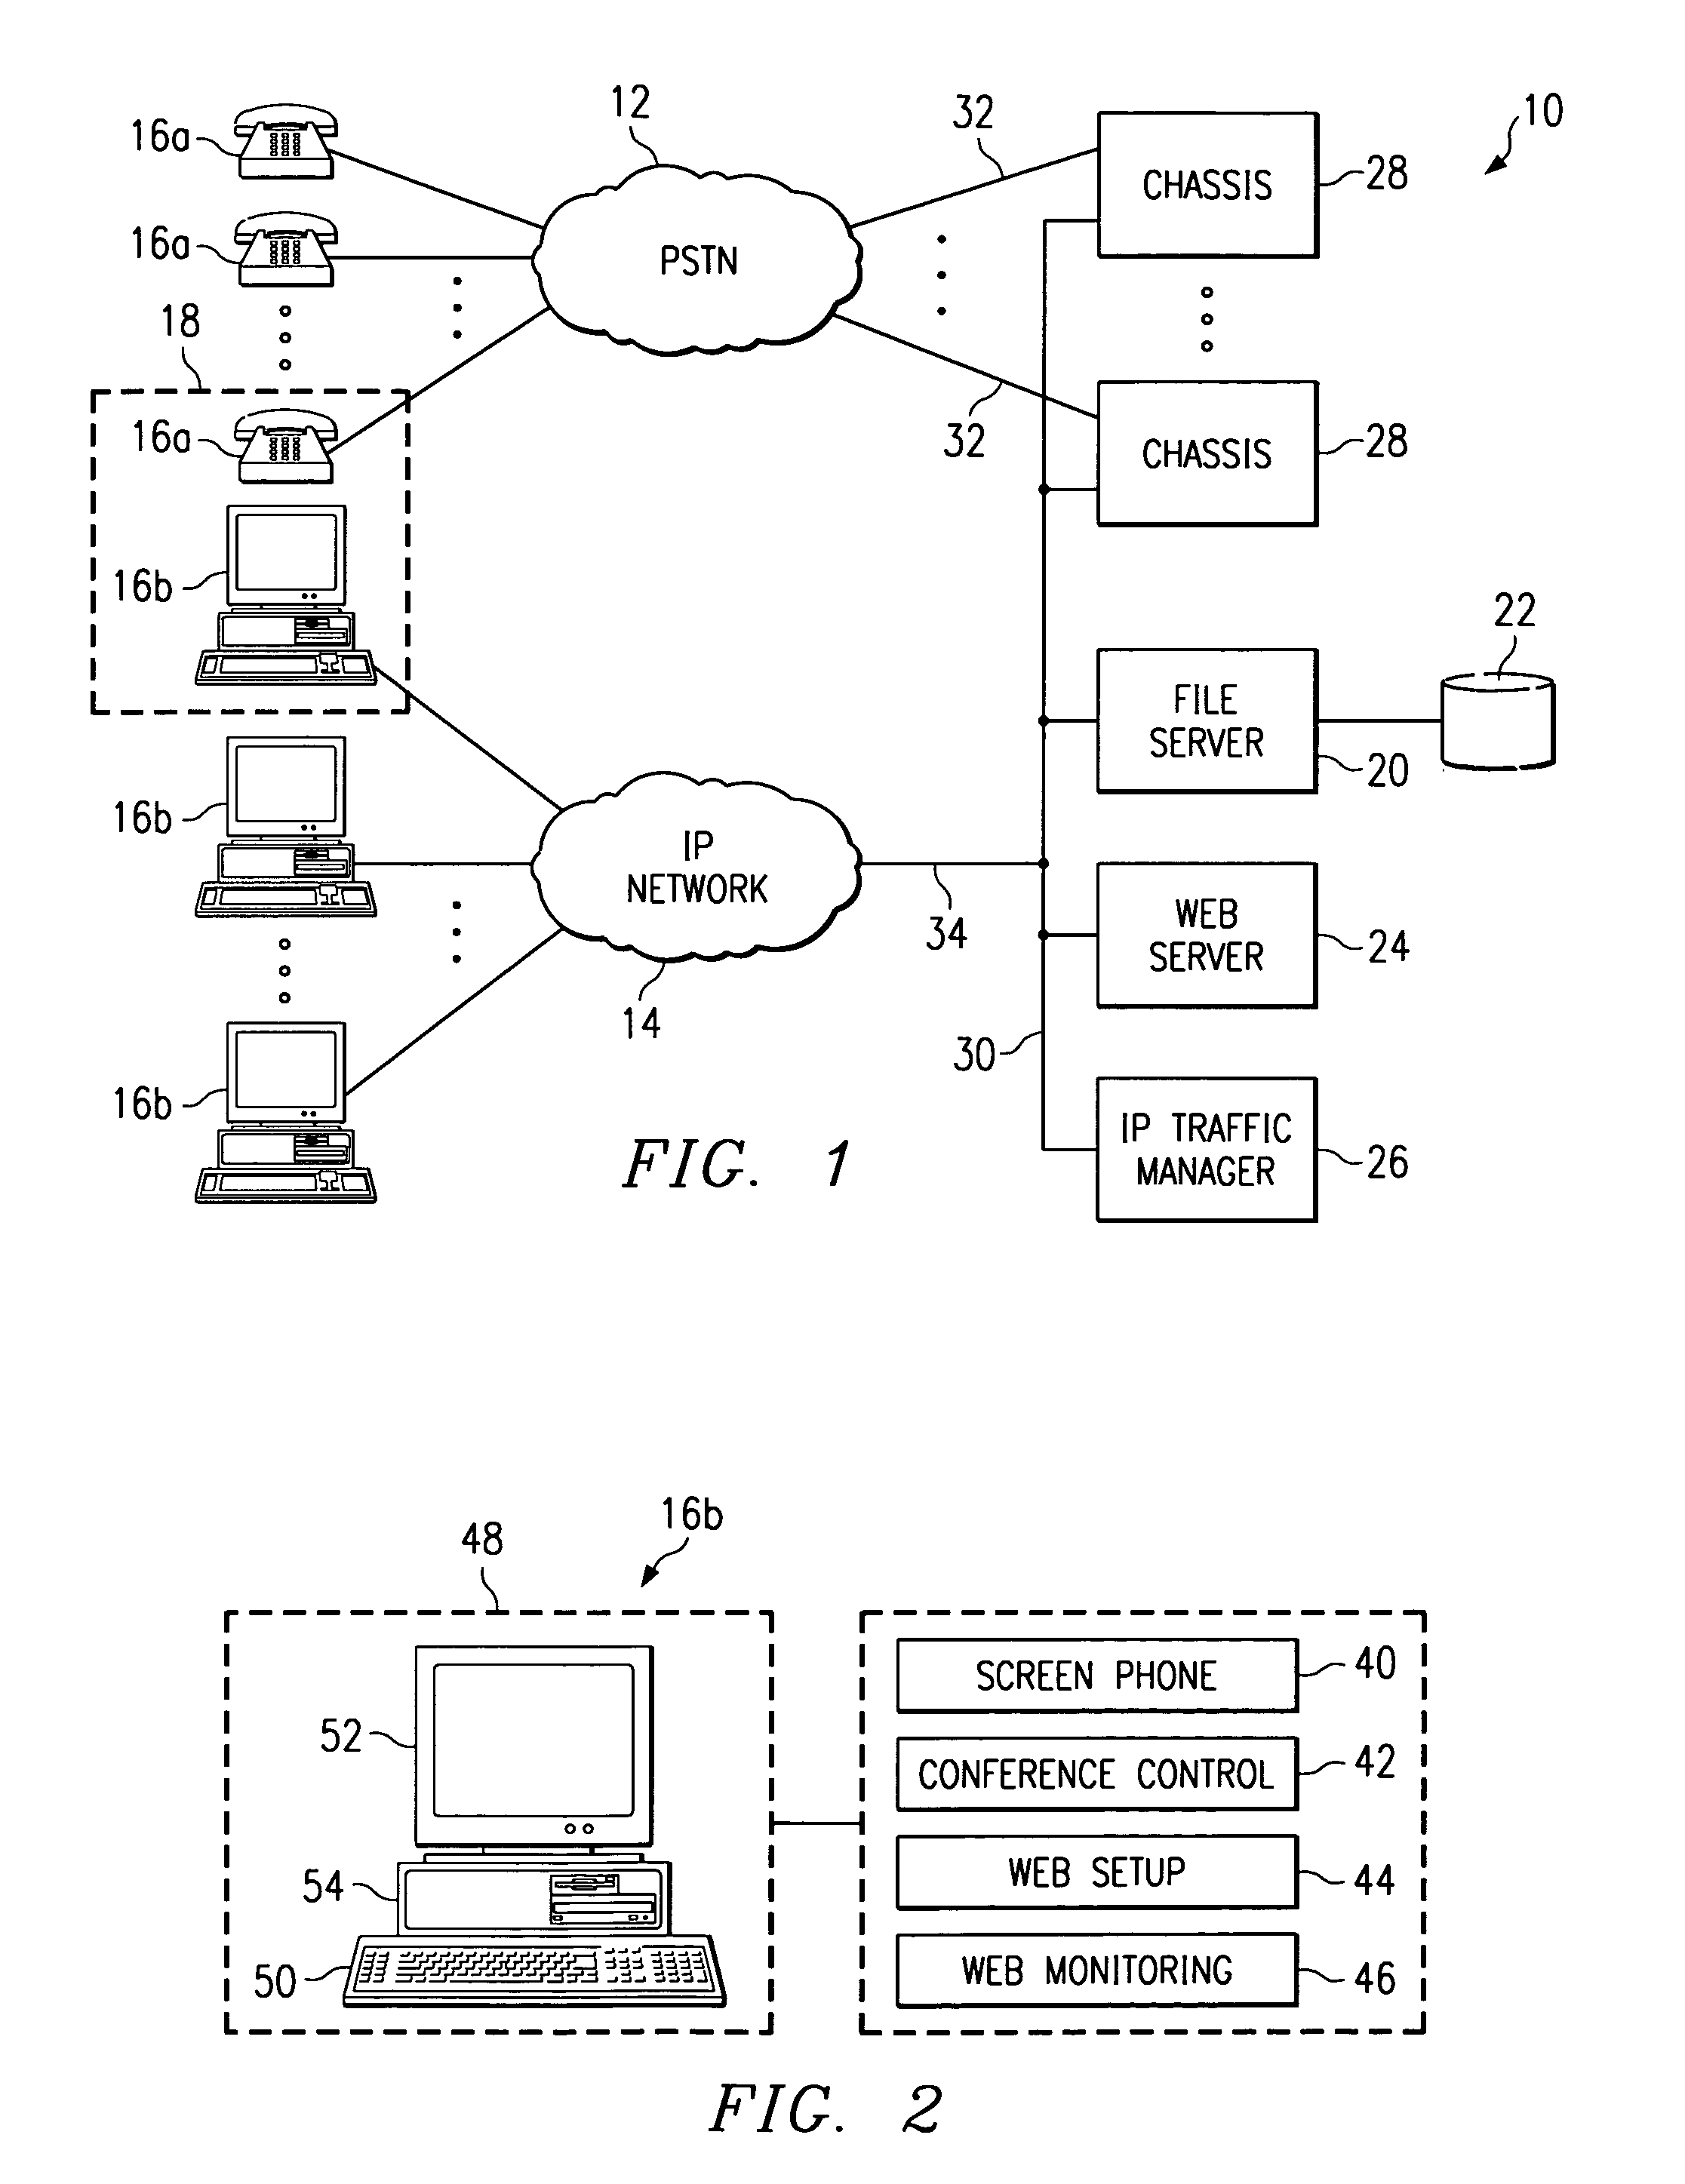 Internet-enabled conferencing system and method accommodating PSTN and IP traffic